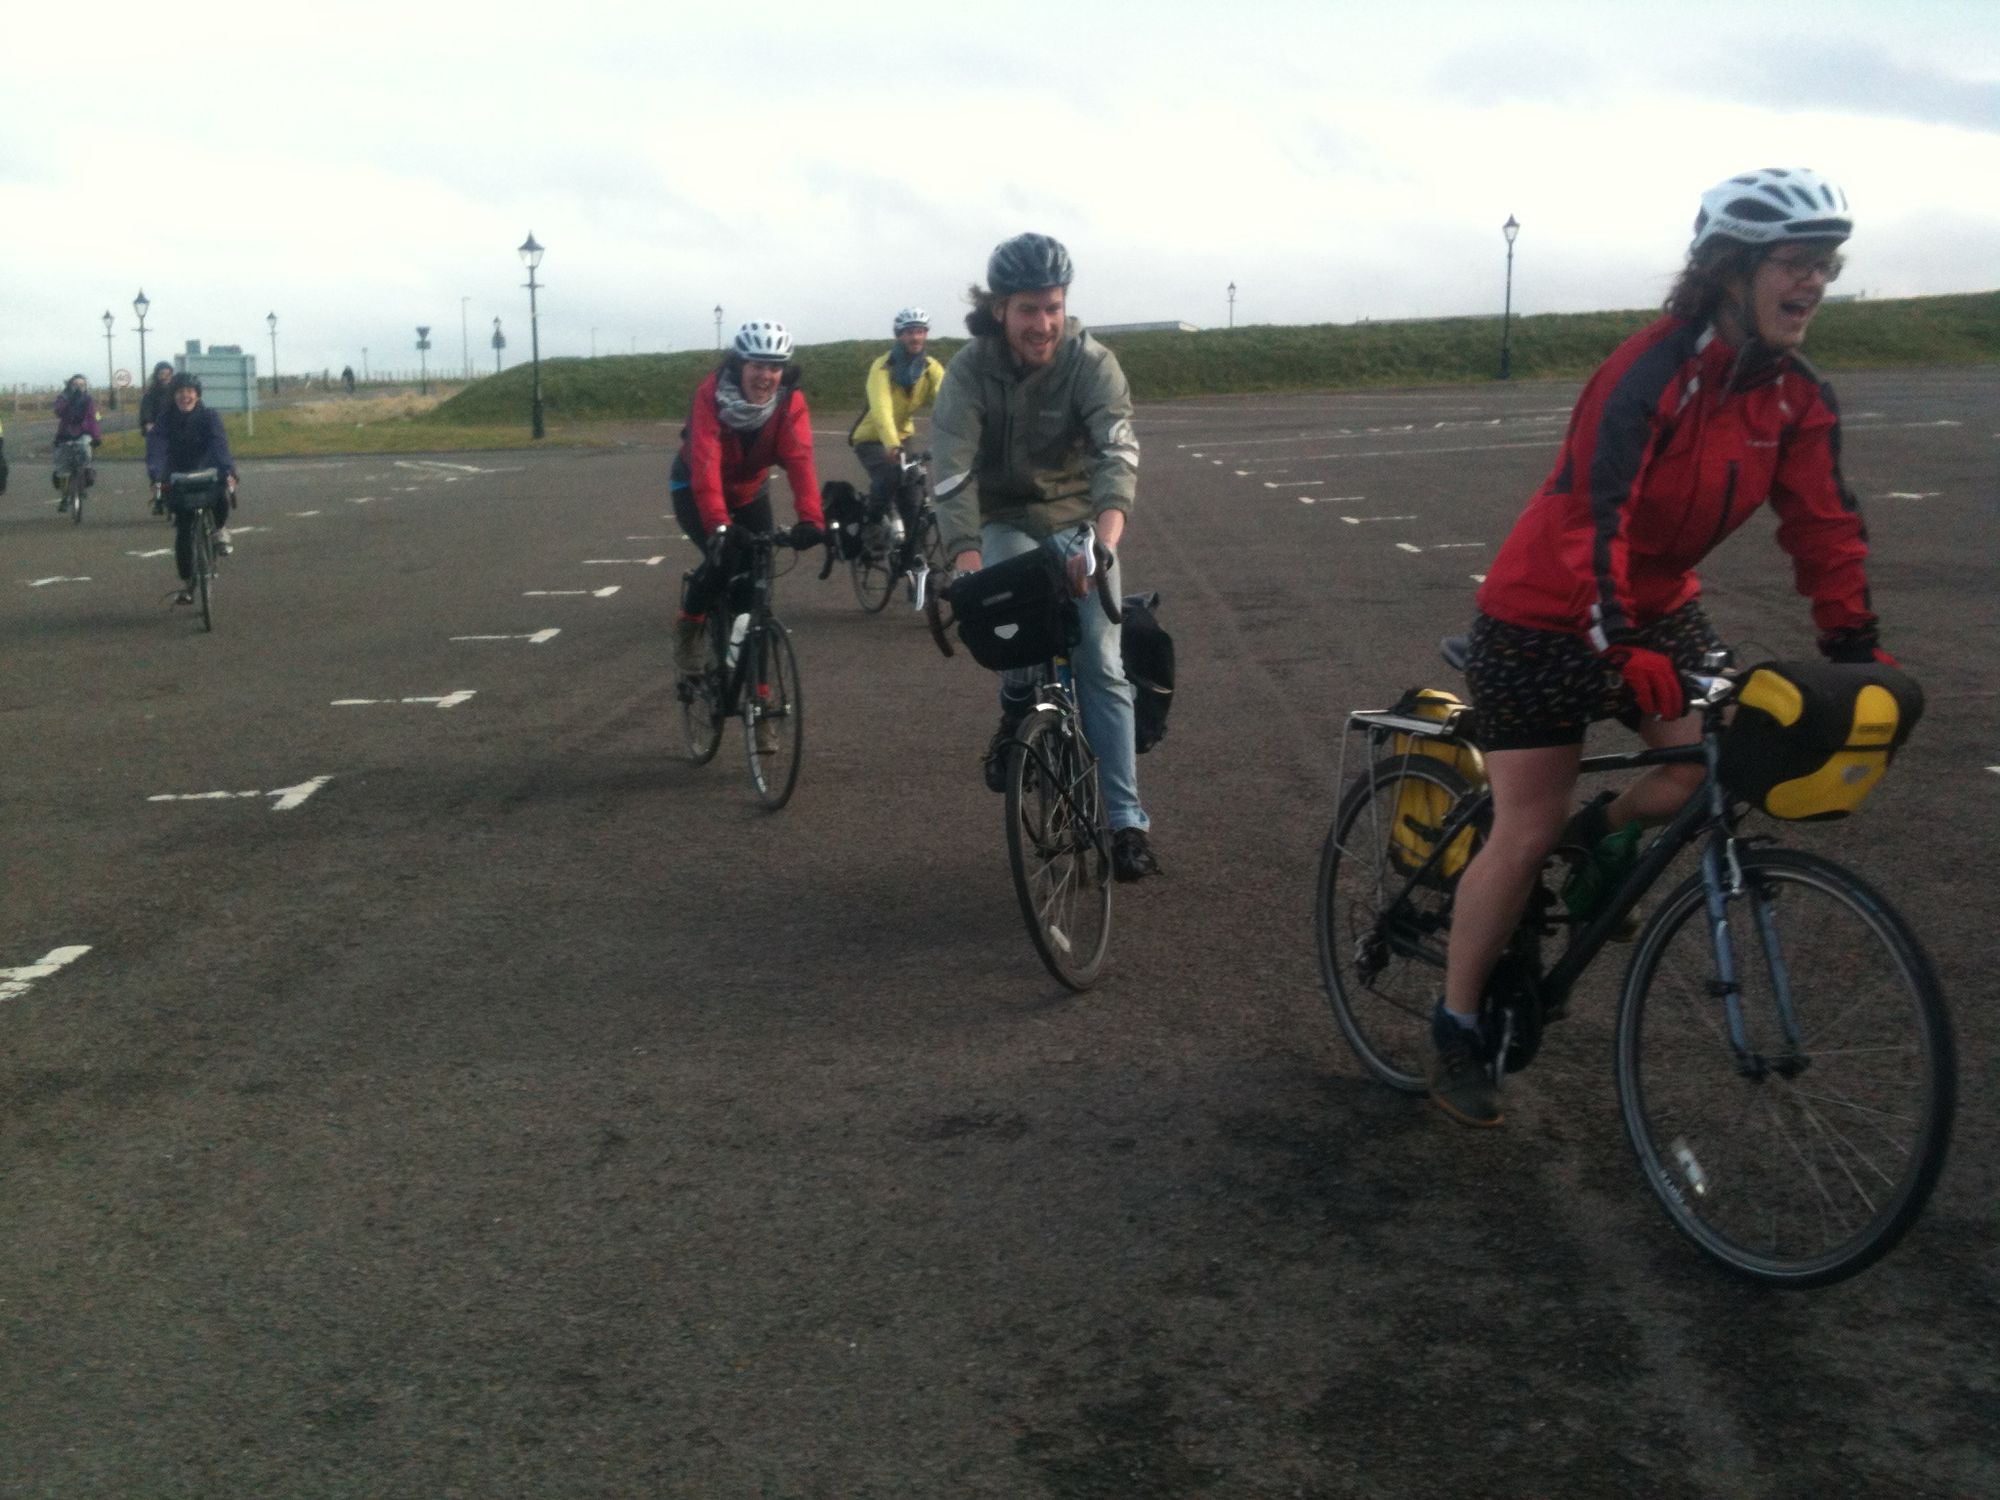 Happy People arriving at John O'Groats